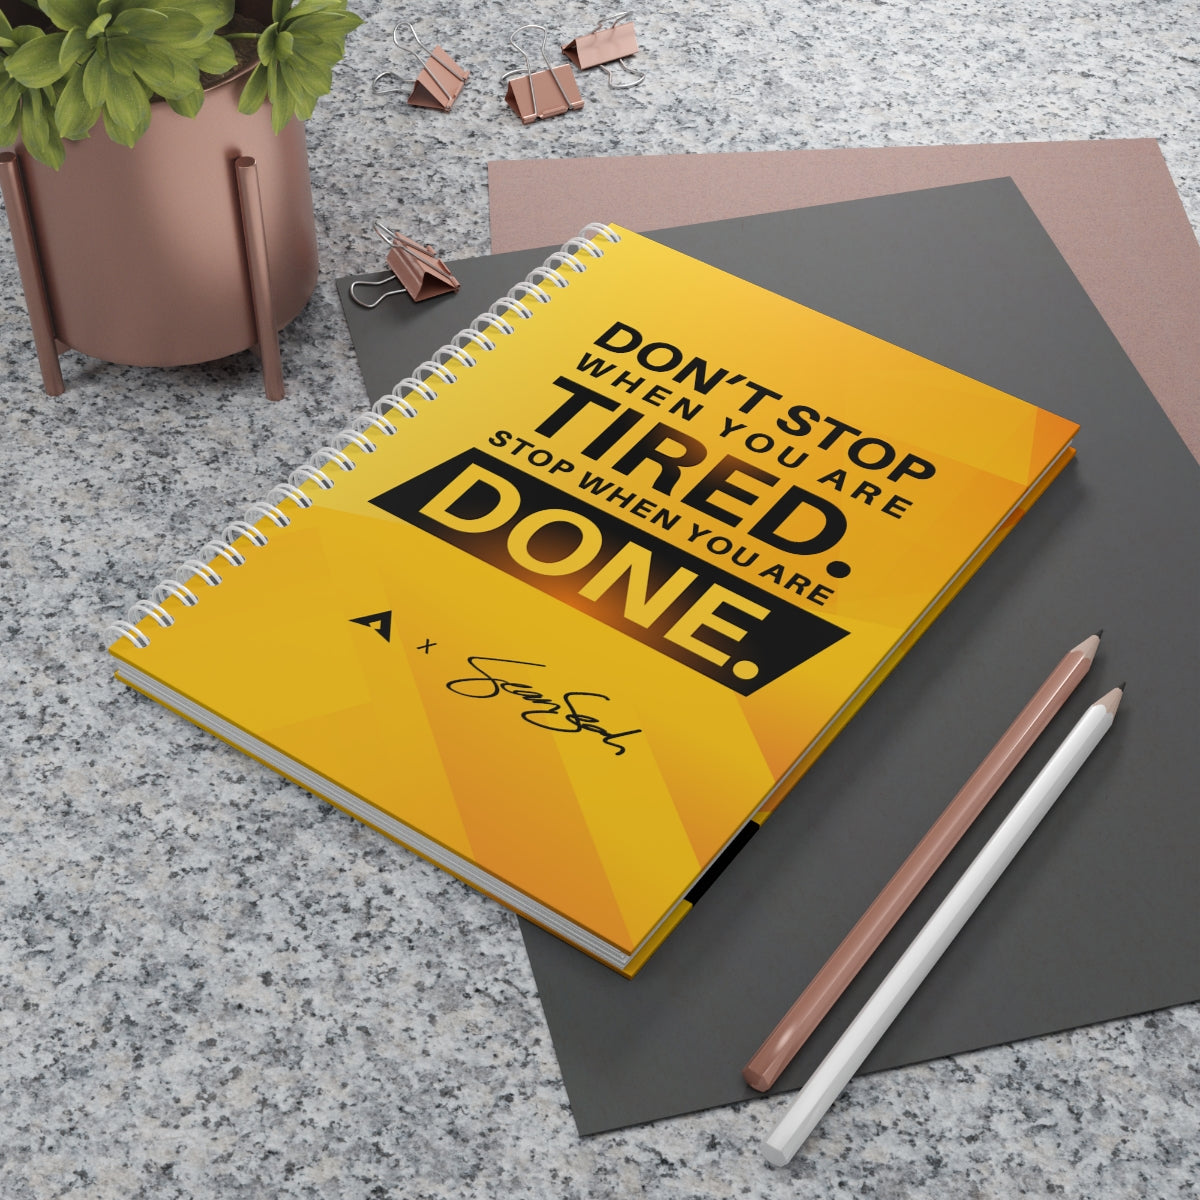 Sean Seah "Don't Stop When You Are Tired" Notebook (Limited Edition)